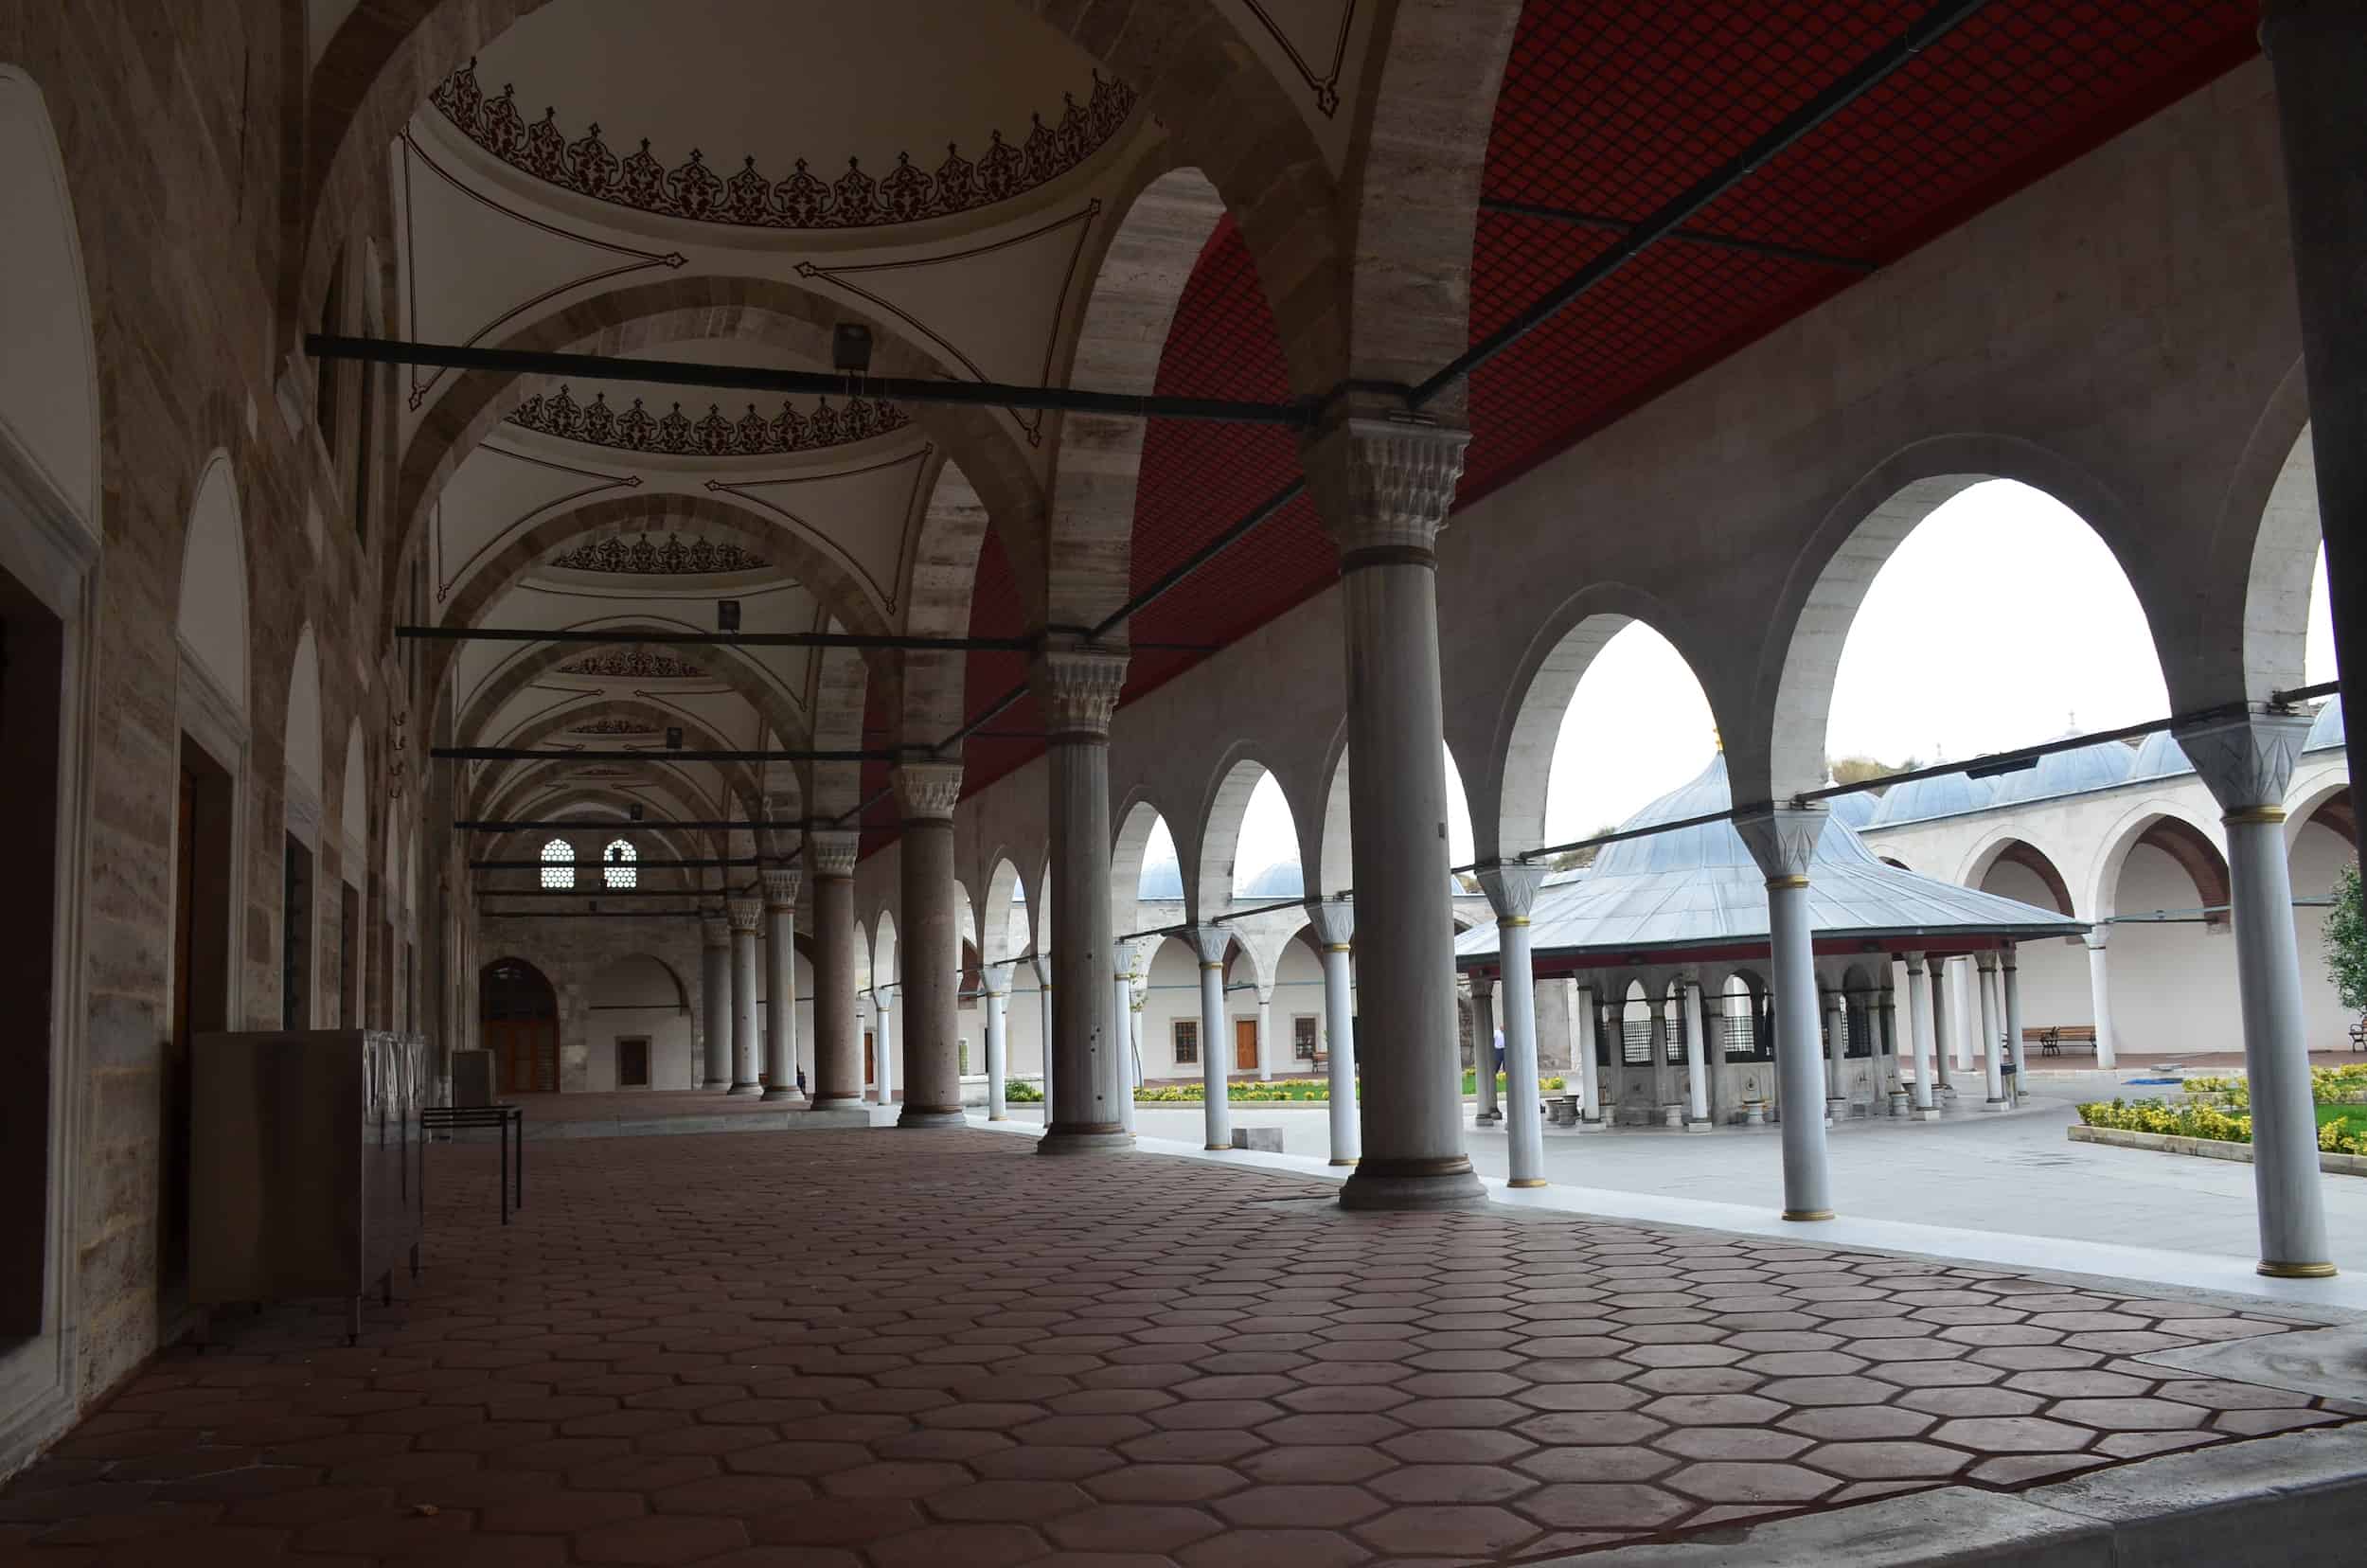 Porch at the Mihrimah Sultan Mosque